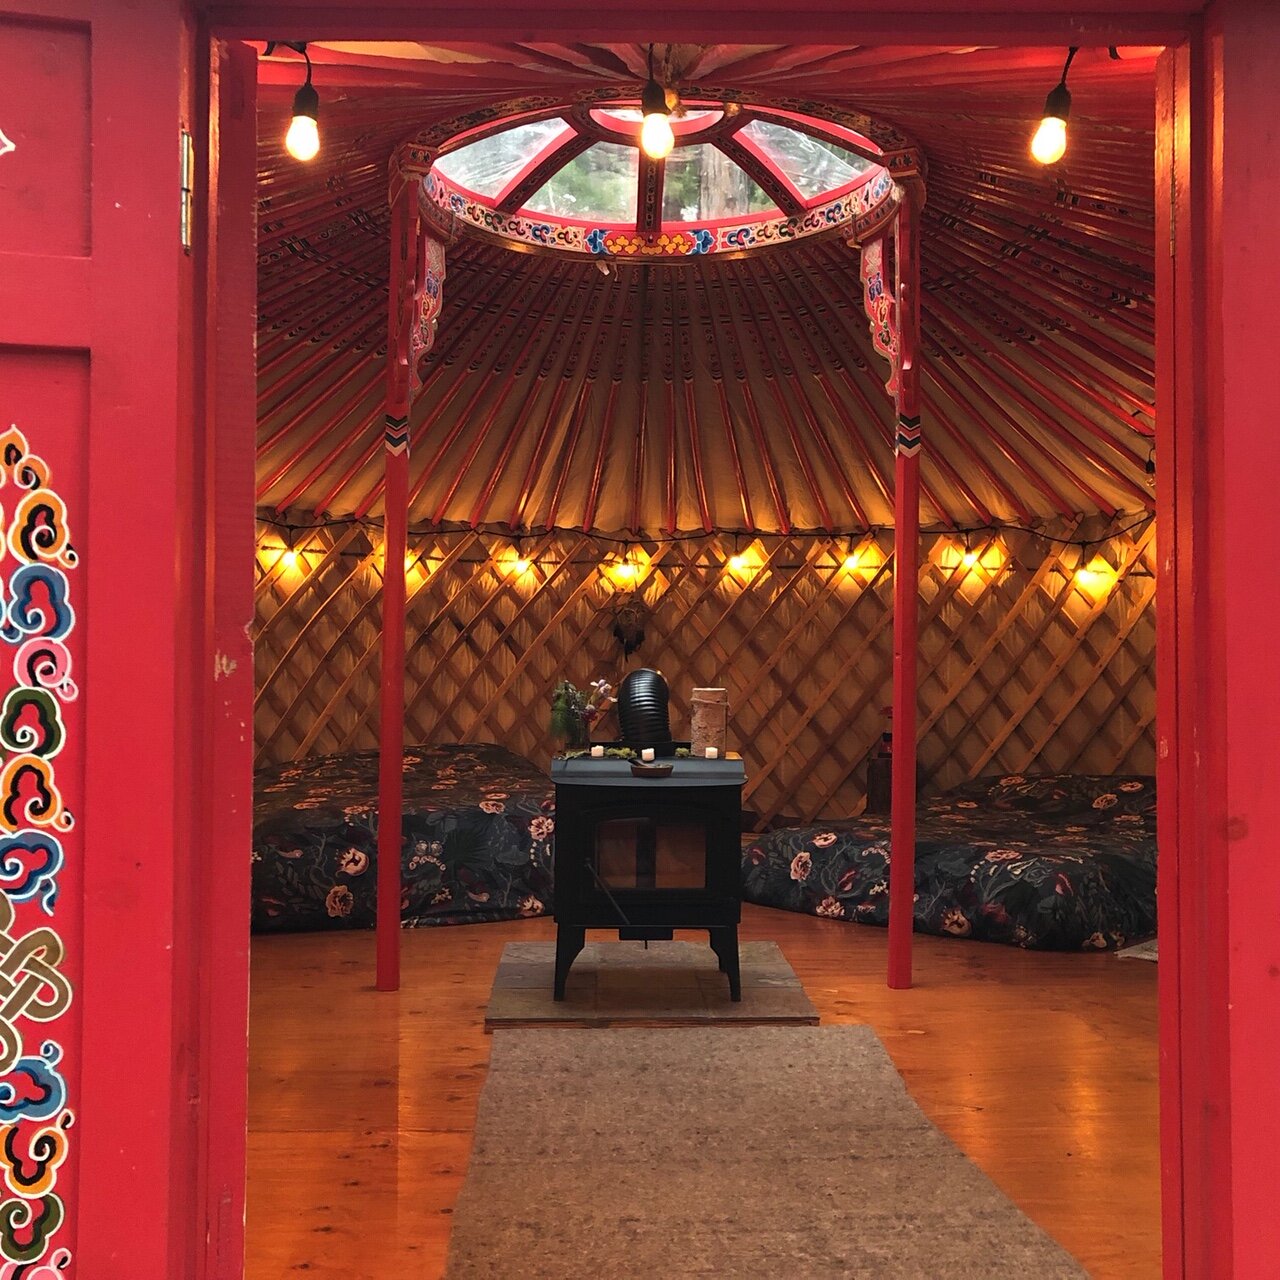 Shared Yurt for 5 - This spacious yurt tucked away in the trees sleeps five on comfortable floor mattresses in a fully enclosed domed yurt. Guests have access to an outdoor sink and shower, and latrine style bathrooms.$750 per person, early bird pricing.